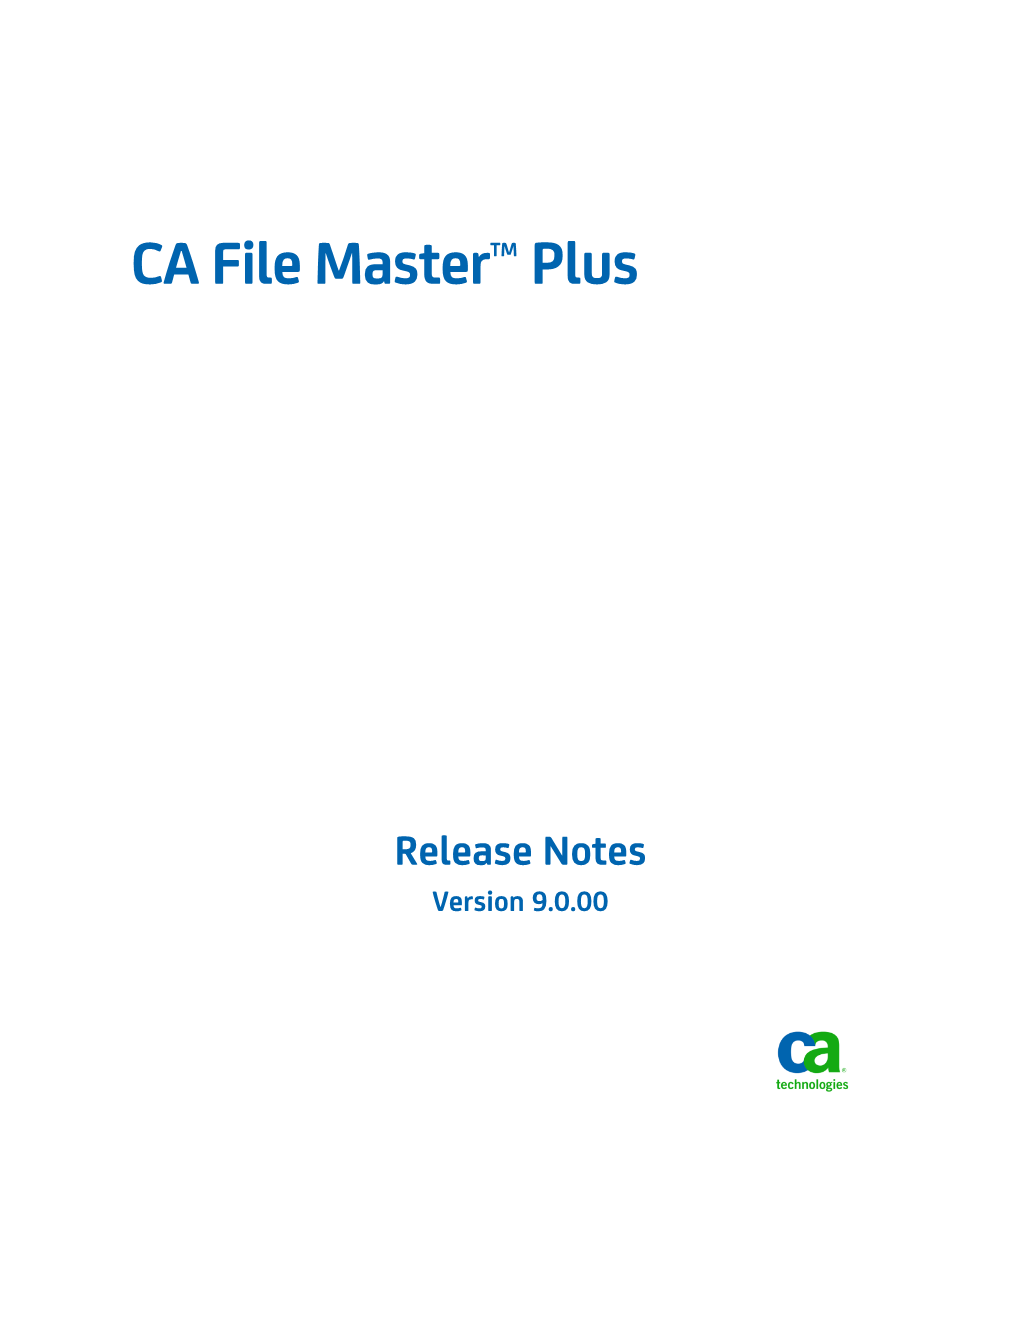 CA File Master Plus Release Notes